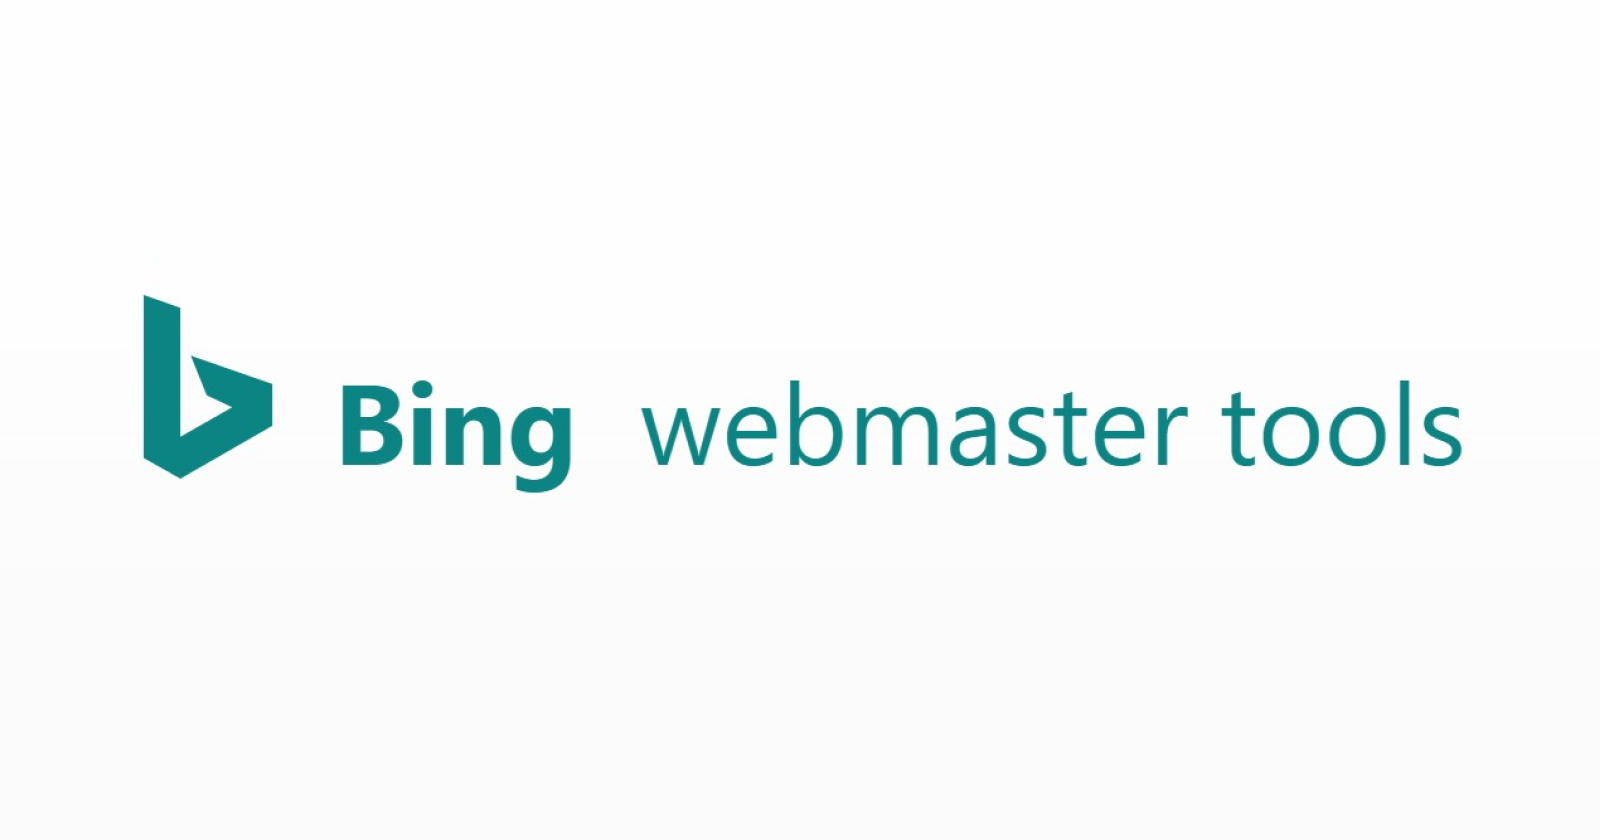 A Visual Guide to New & Updated Features in Bing Webmaster Tools